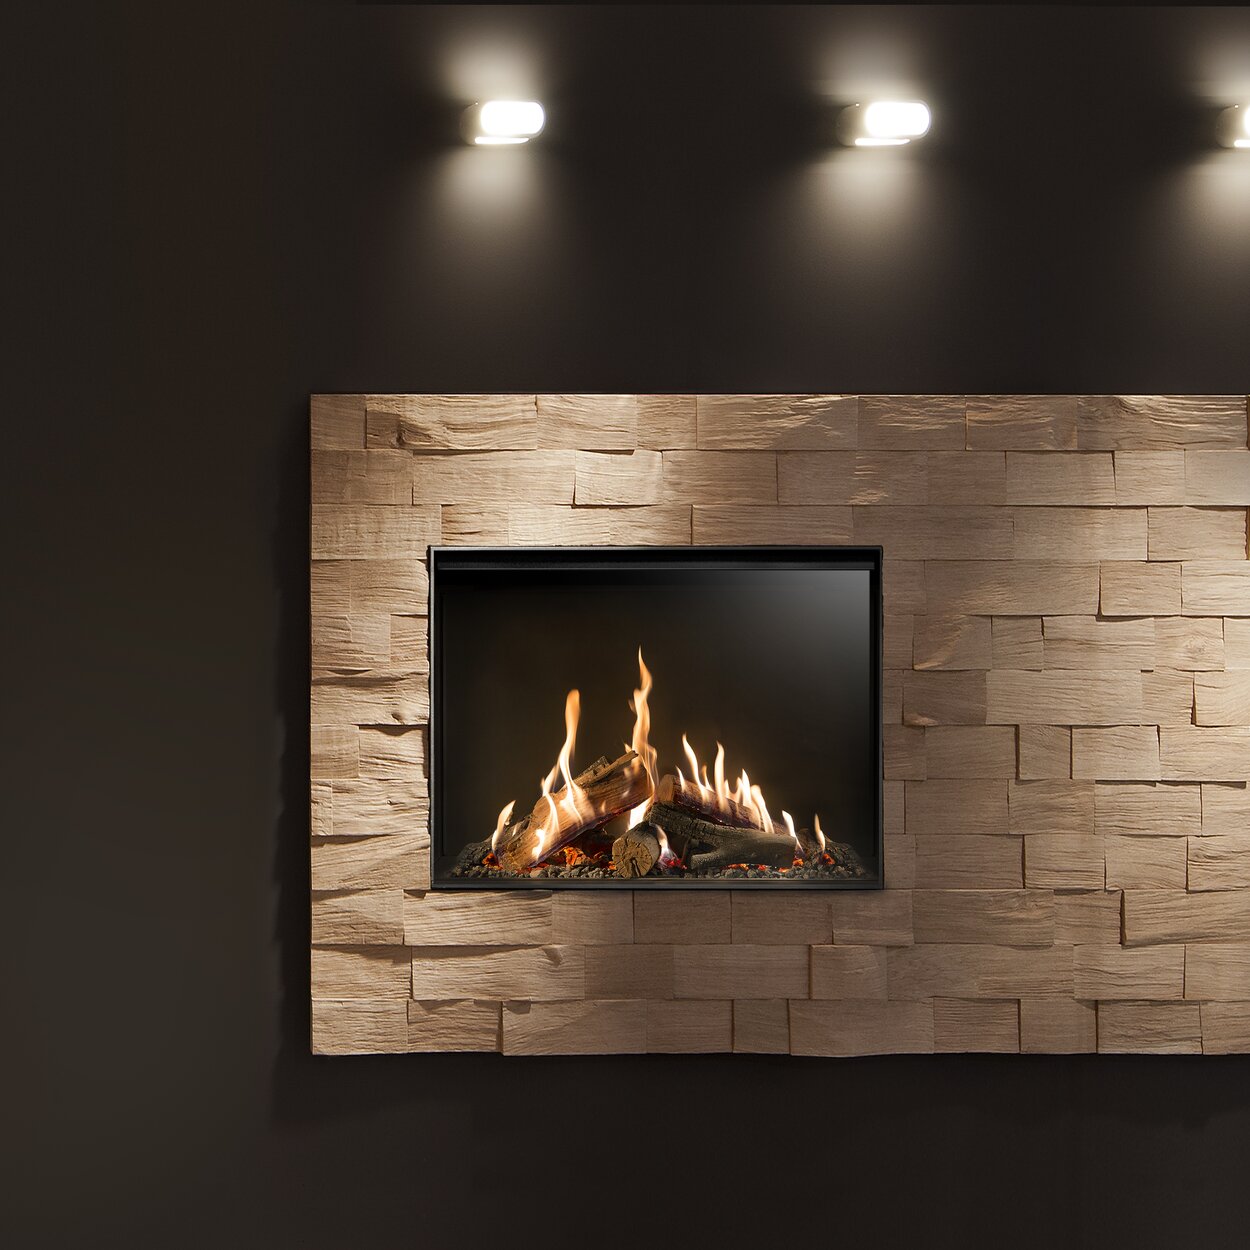 Gas fireplace GP75/59F front model built into natural stone wall, with lighting from top